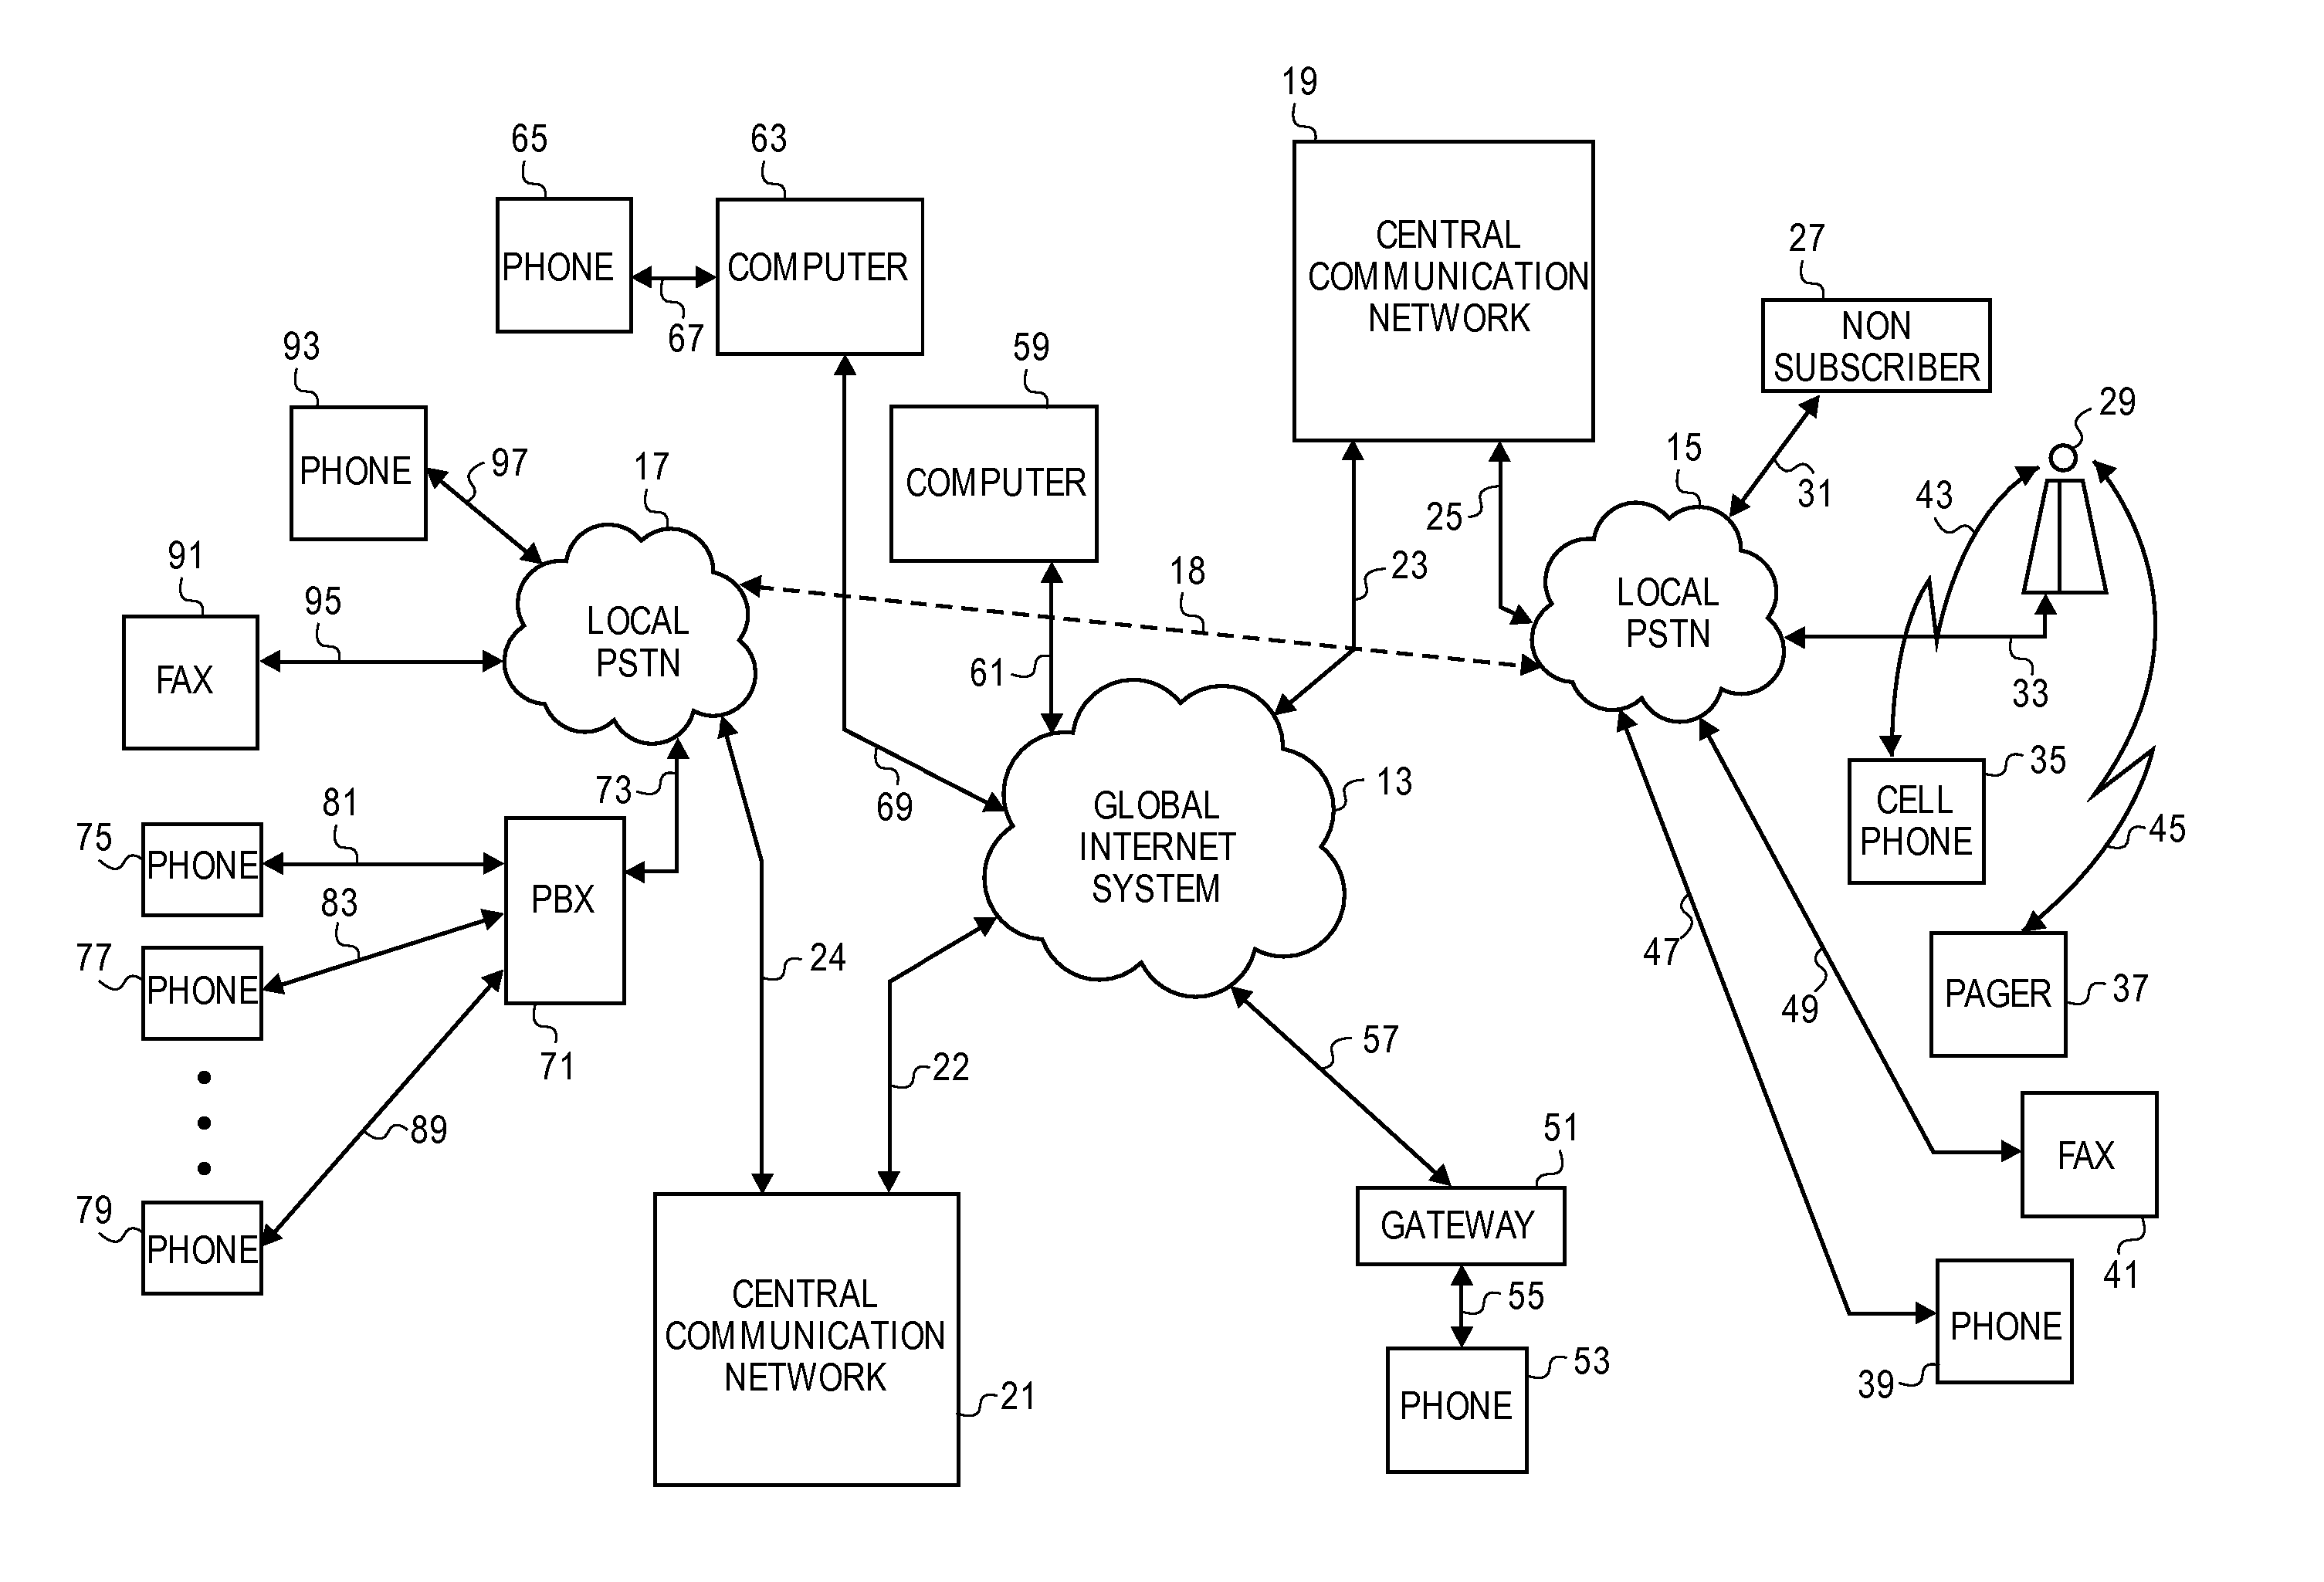 Method and Apparatus for Interfacing a Public Switched Telephone Network and an Internet Protocol Network for Multi-Media Communication